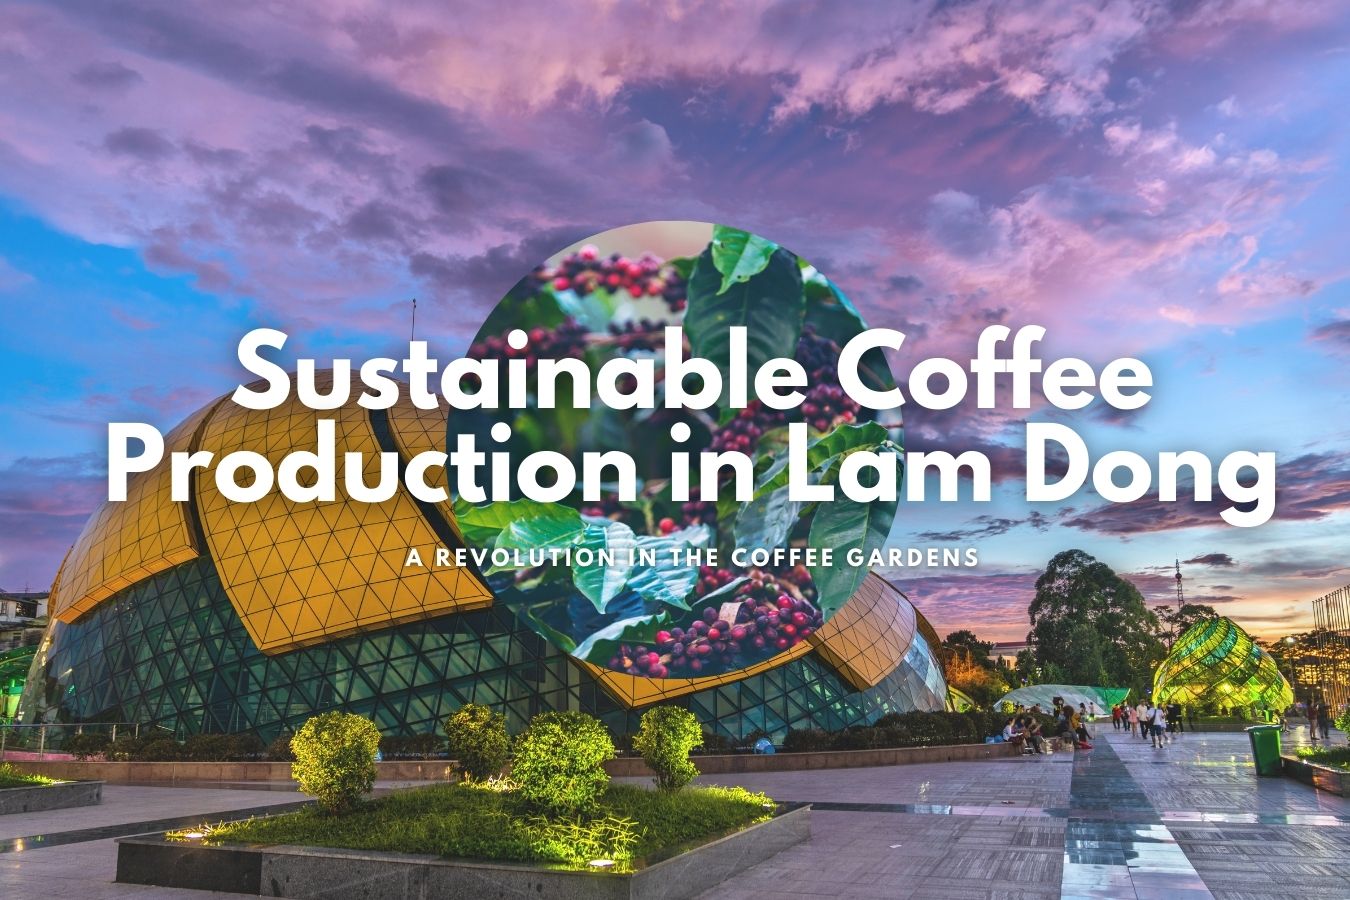 Sustainable Coffee Production in Lam Dong: A Revolution in the Coffee Gardens